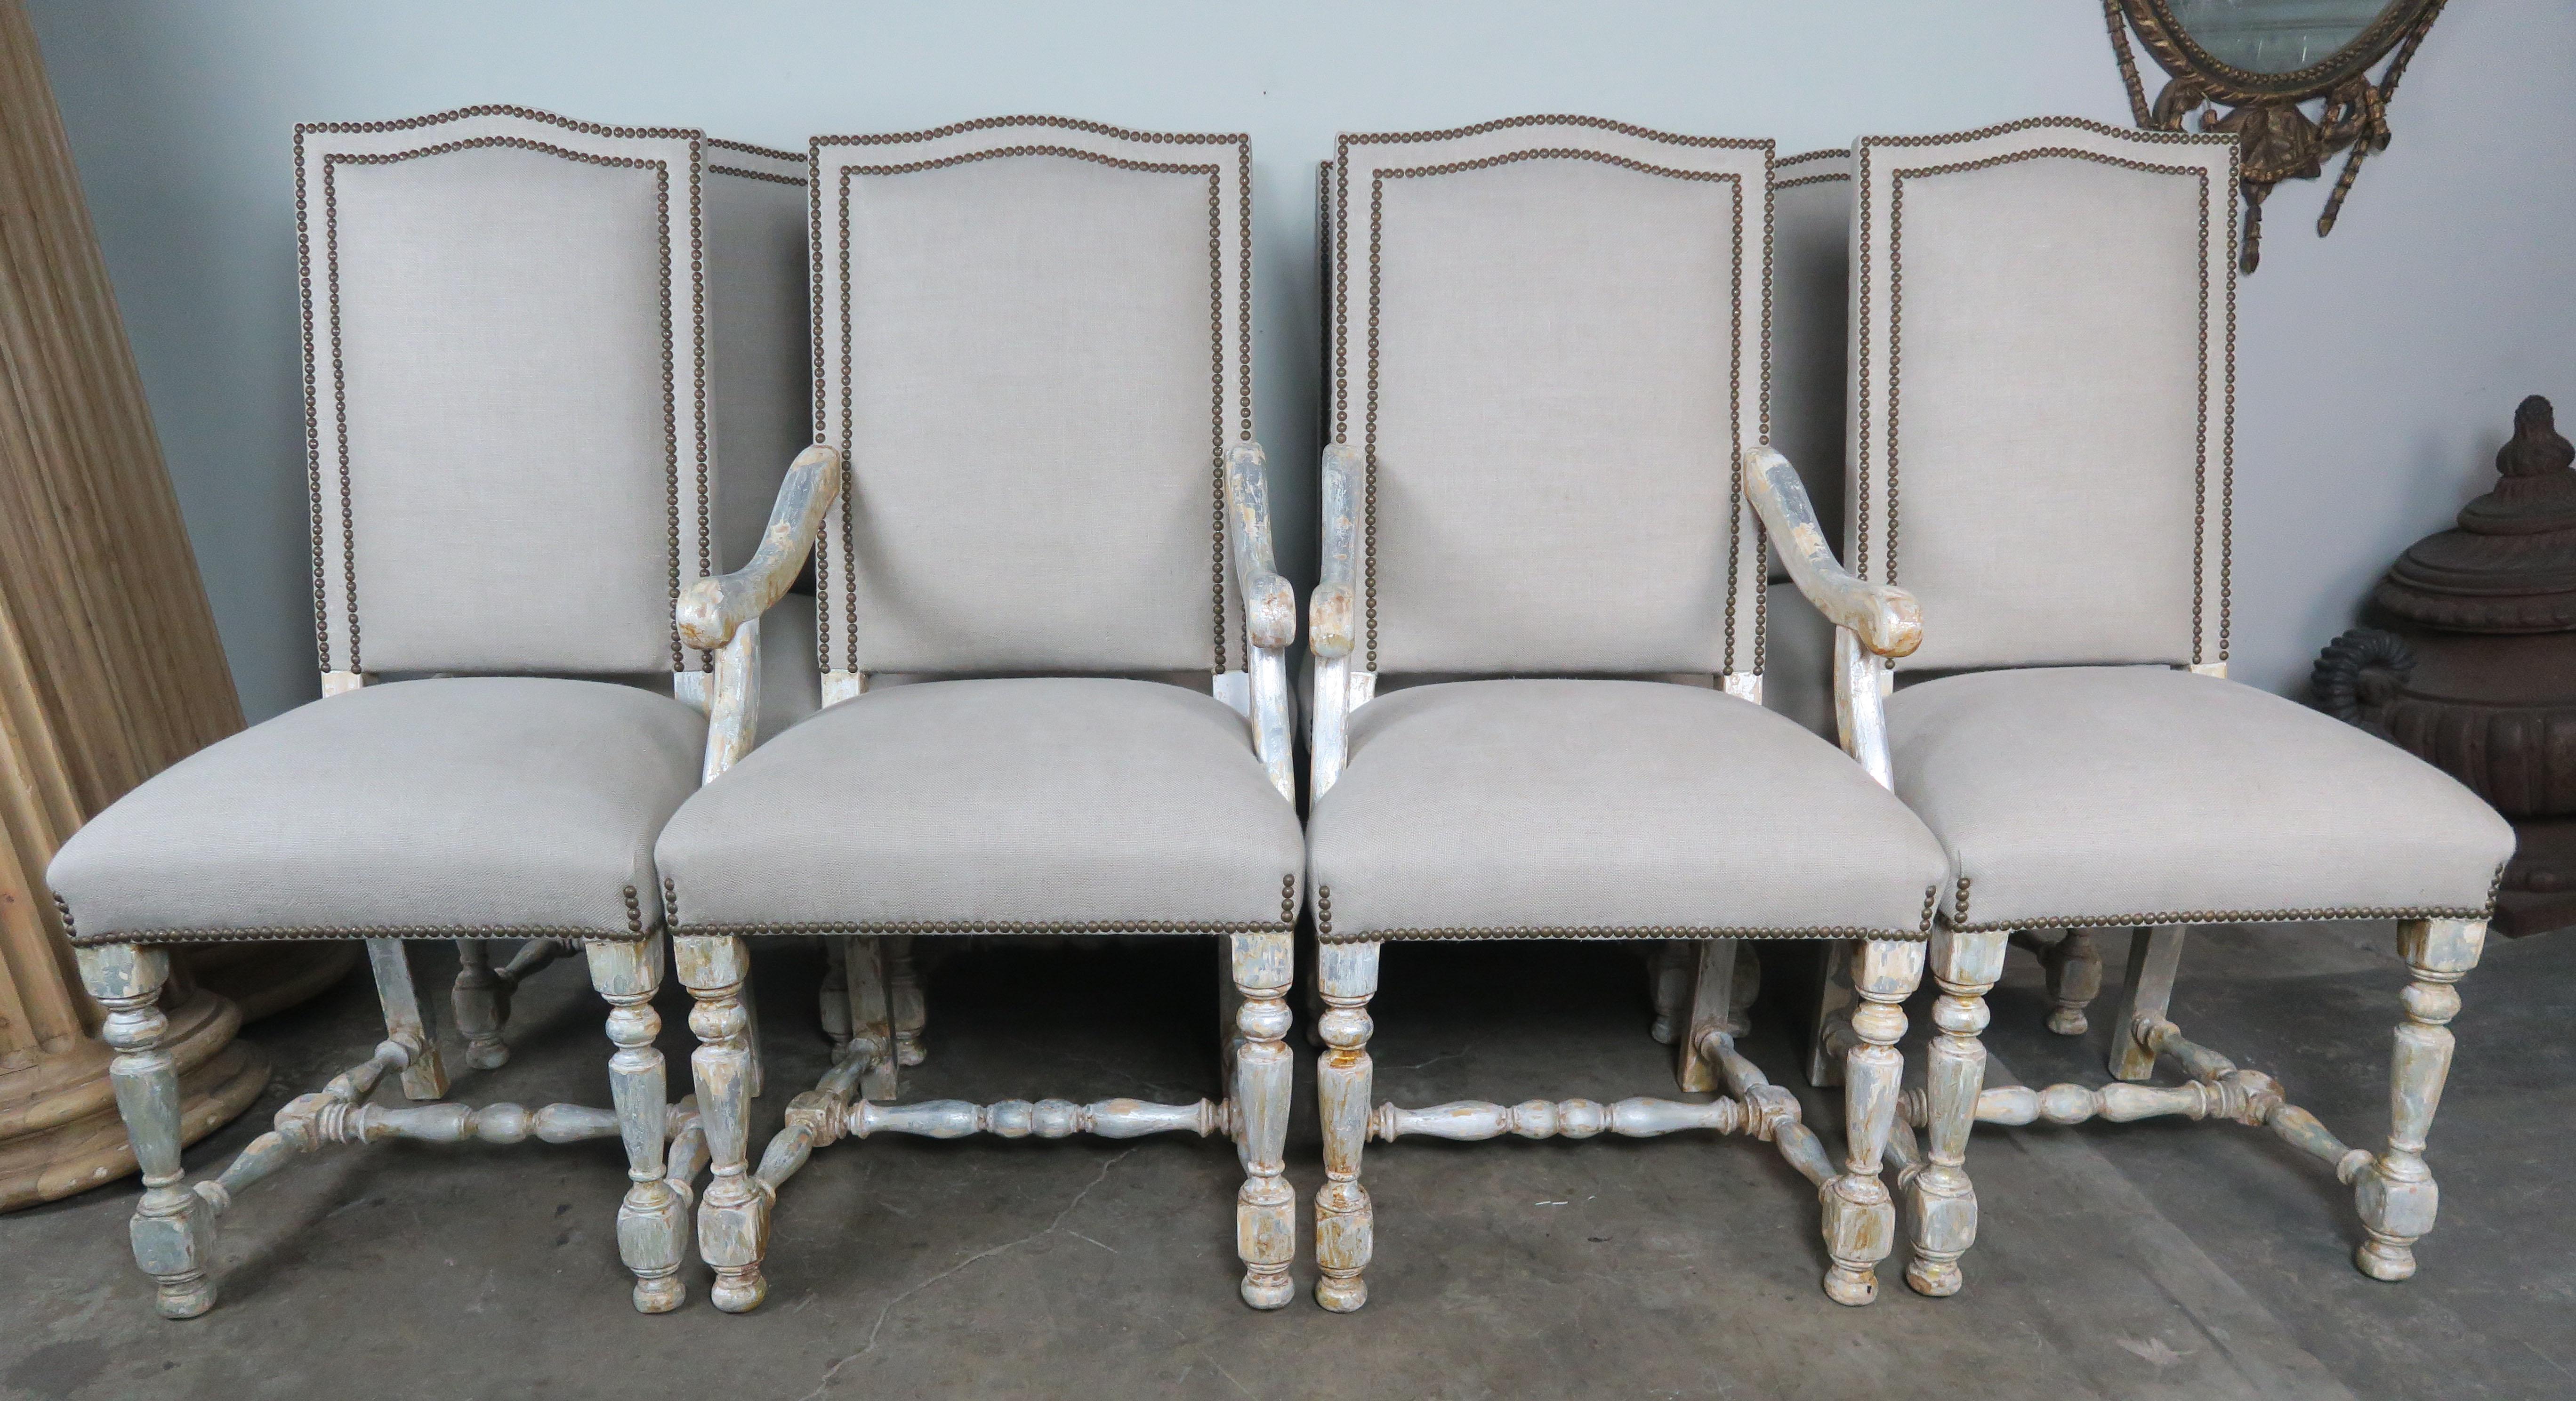 Set of eight Swedish silvered and painted dining chairs that are newly reupholstered in a soft washed Belgium linen upholstery with a double row of nailheads.
Measures: 21